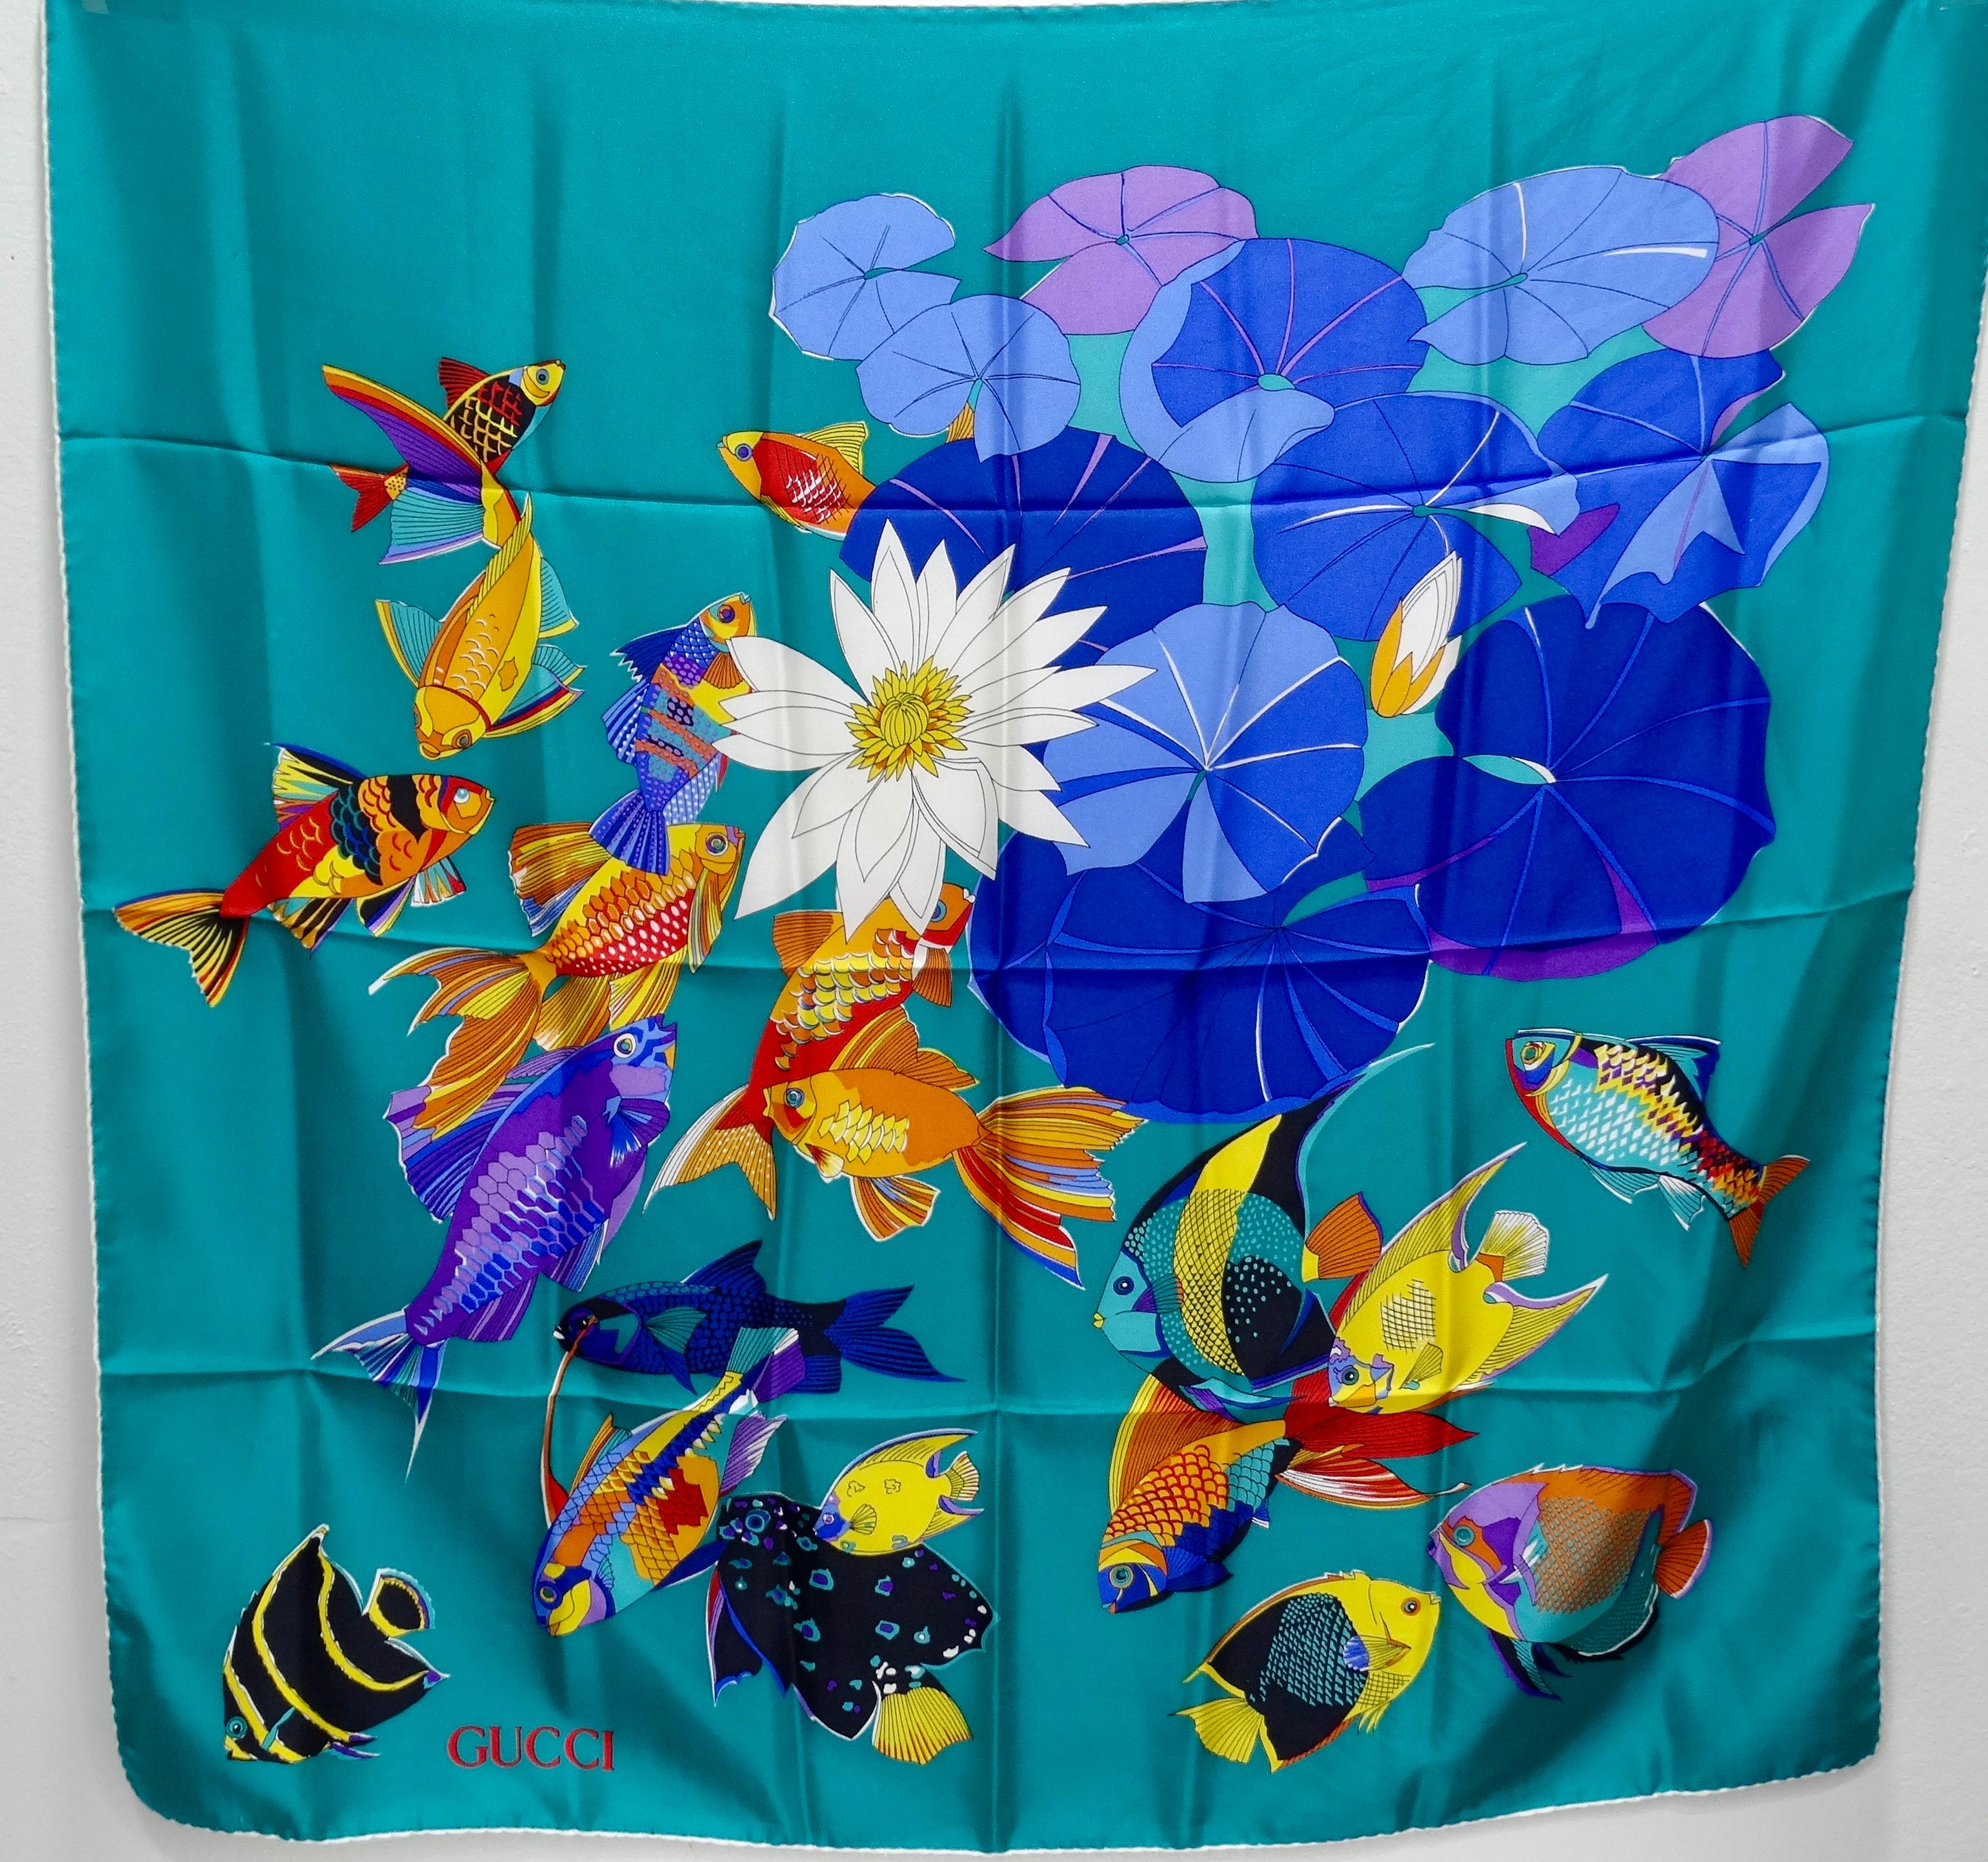 Add this amazing vintage piece to your collection! Circa 1980s, this amazing teal Gucci Silk scarf features a vibrant multi-colored fish motif in the center with contrasting lily pads. At the base is the Gucci signature in red. Rolled edges. Unique